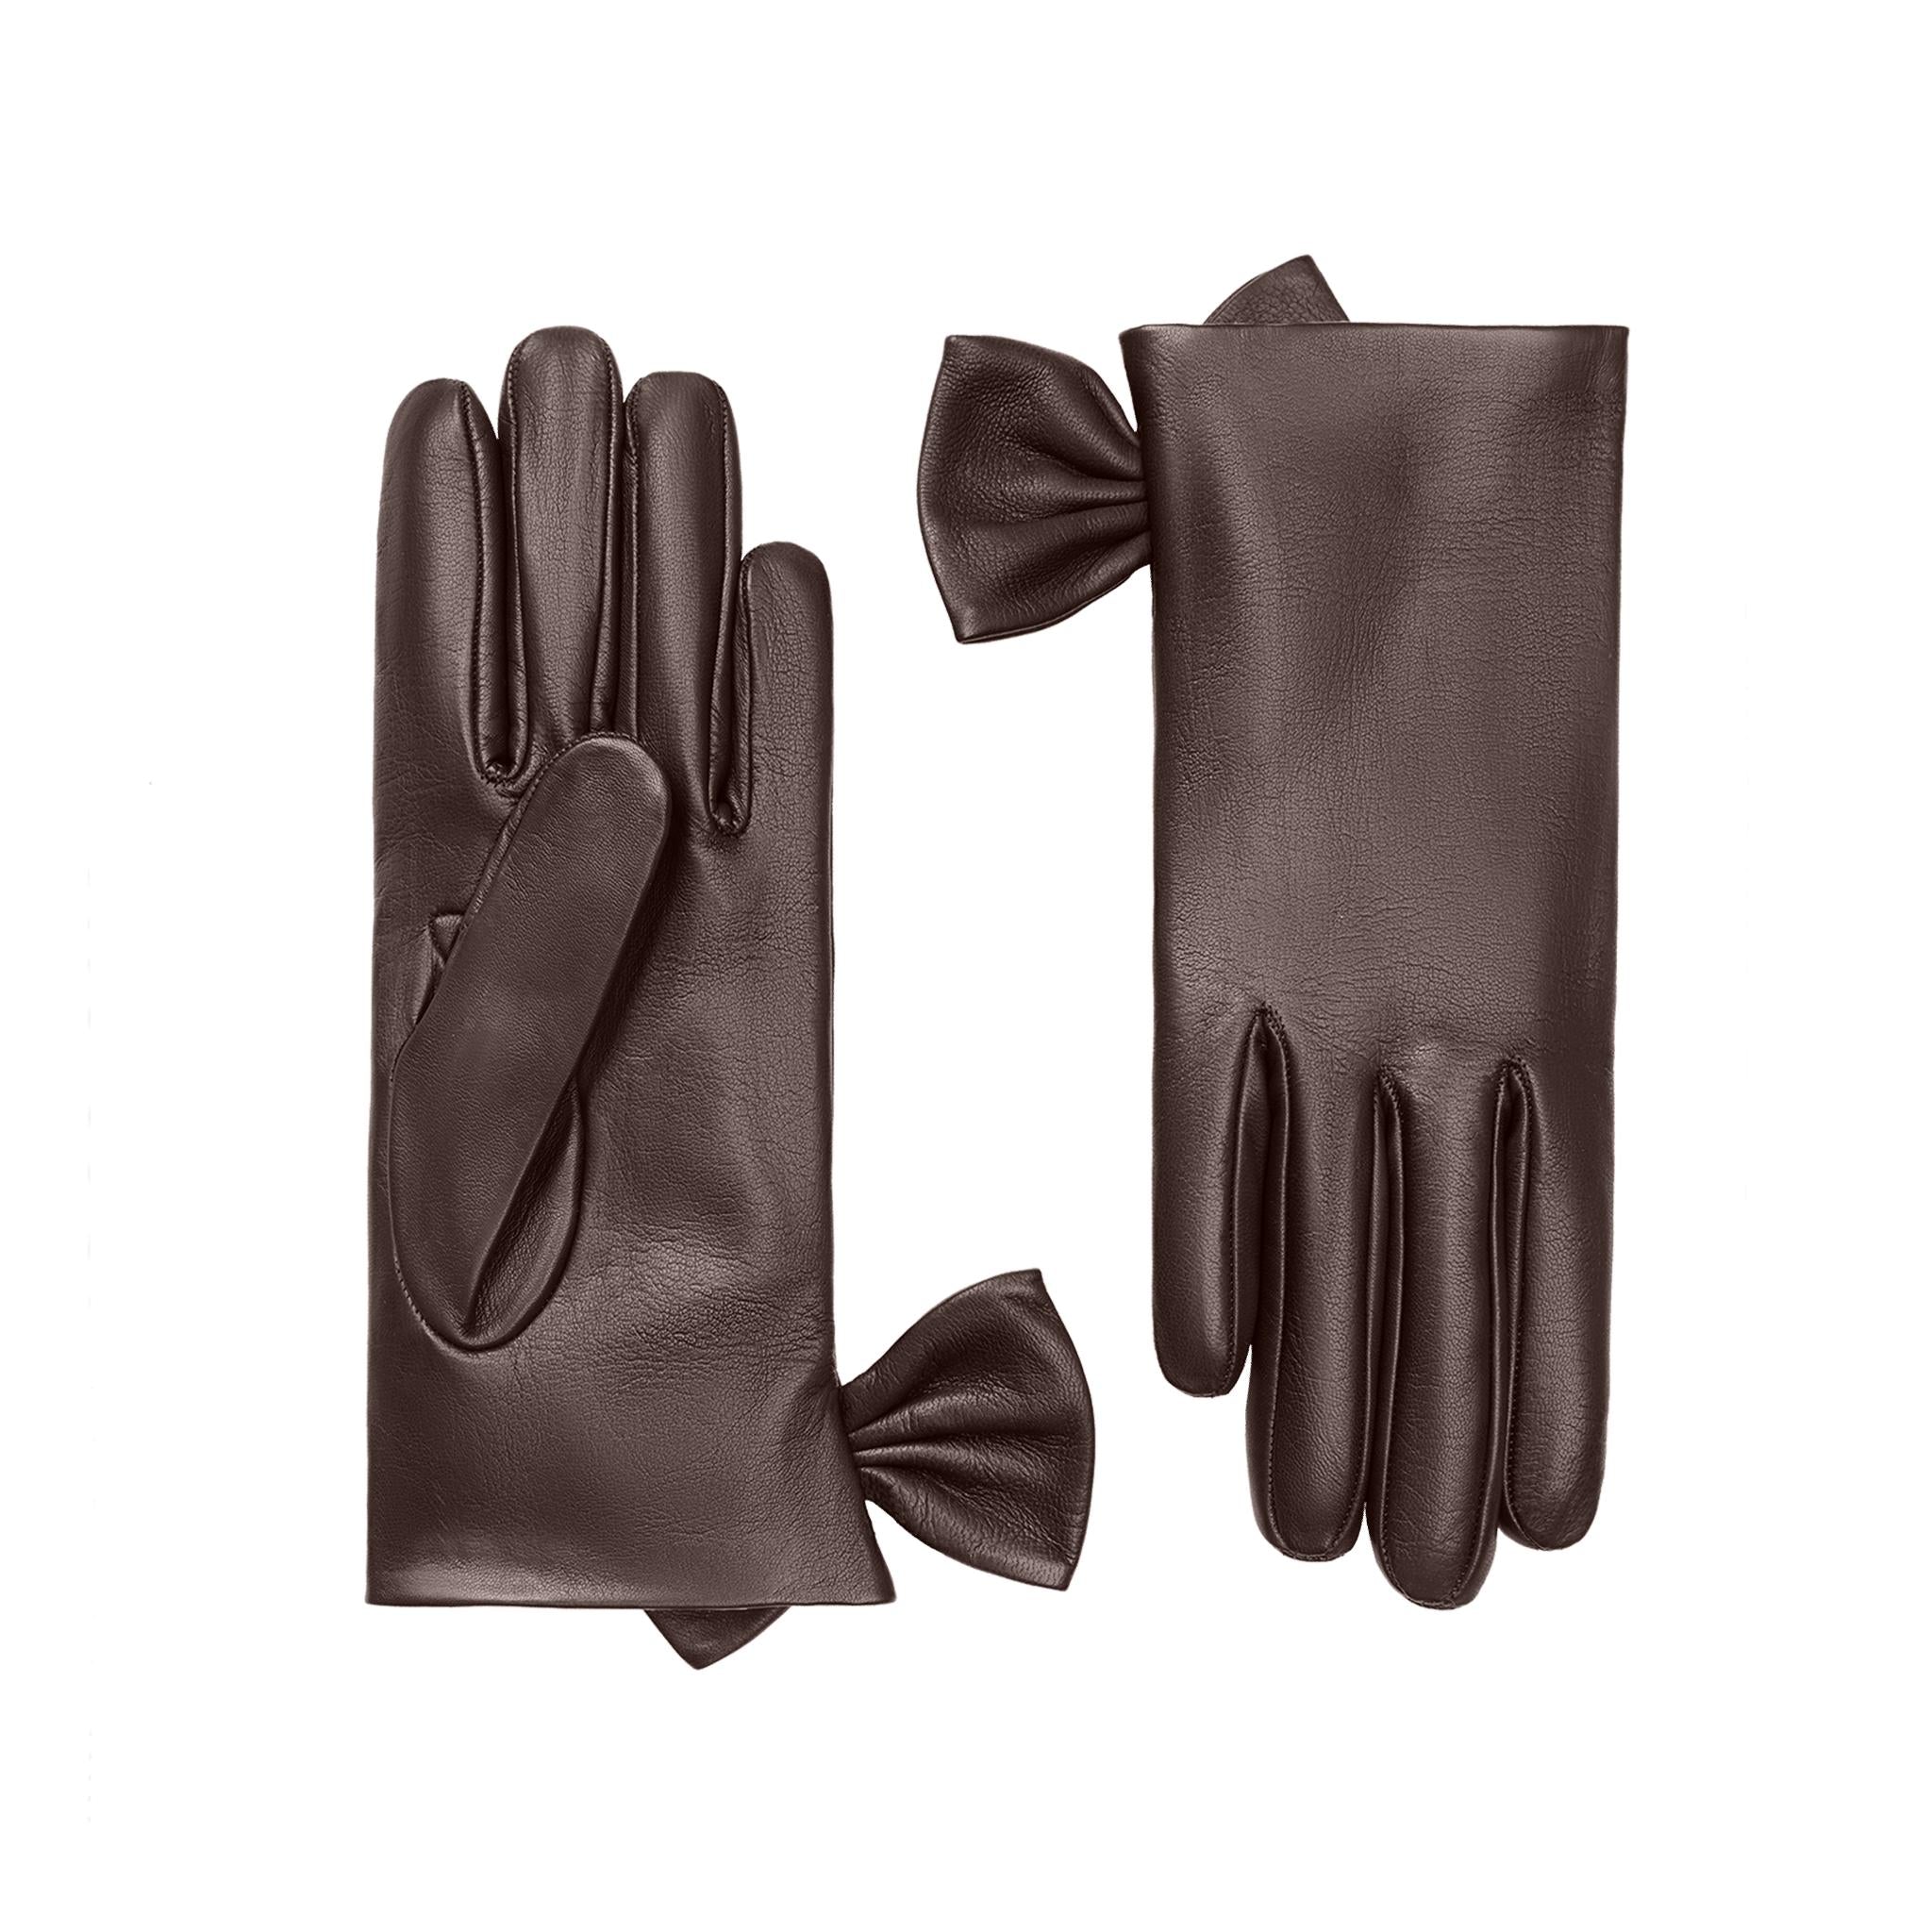 Cornelia James - Brown Leather Gloves with Silk Lining - Fleur - Size Large (8½) - Handmade Leather Gloves by Cornelia James product